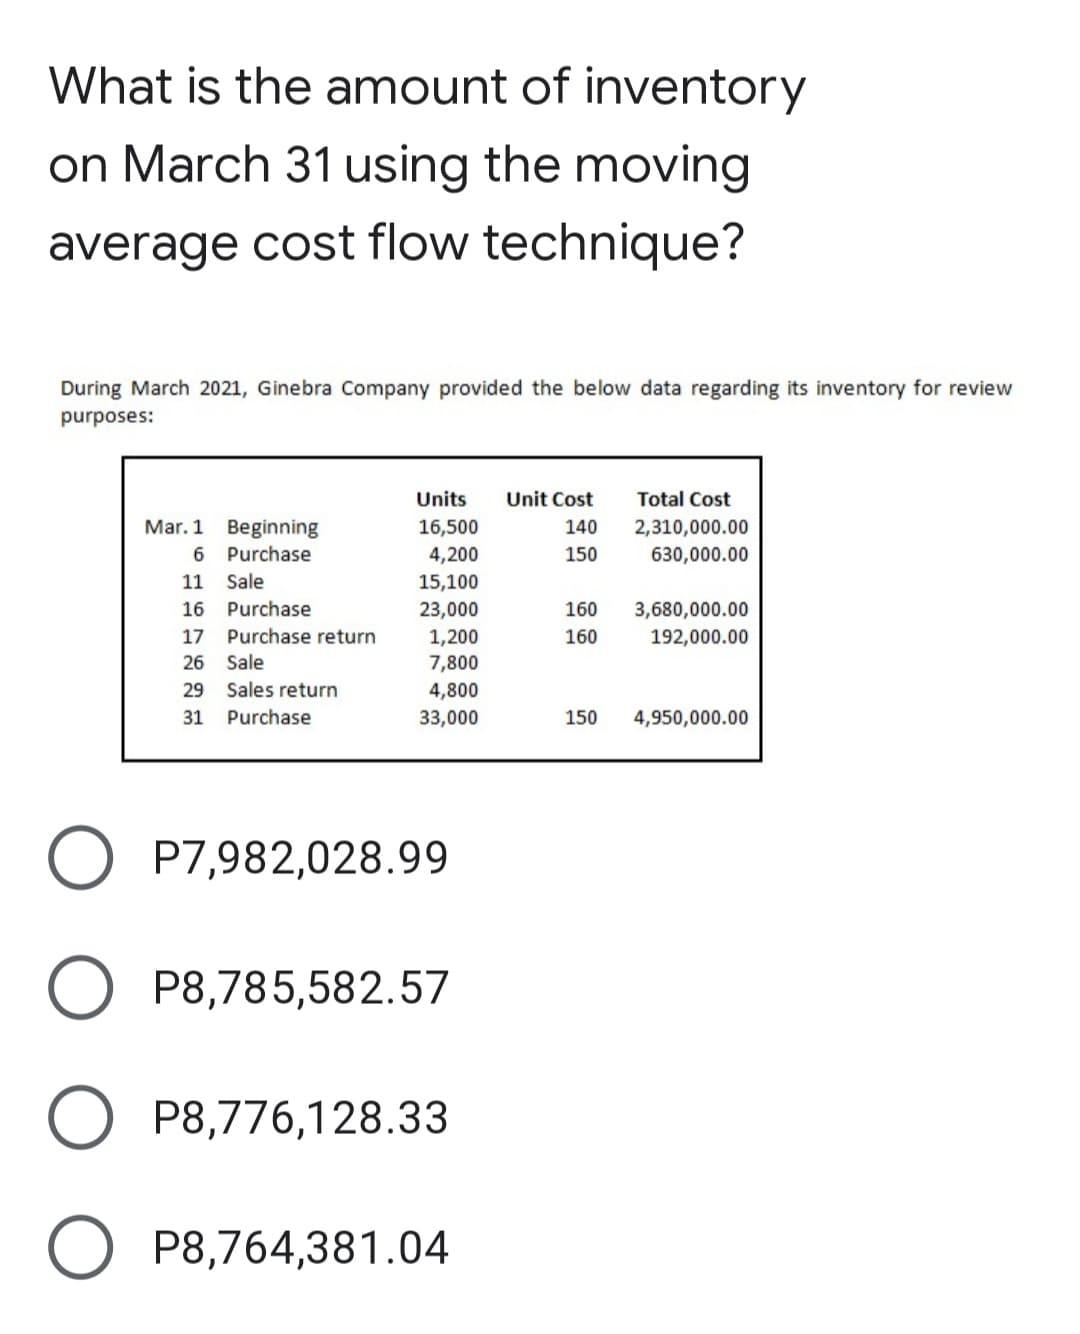 What is the amount of inventory
on March 31 using the moving
average cost flow technique?
During March 2021, Ginebra Company provided the below data regarding its inventory for review
purposes:
Units
Unit Cost
Total Cost
Mar. 1 Beginning
6 Purchase
16,500
140
2,310,000.00
4,200
150
630,000.00
15,100
23,000
11
Sale
16
Purchase
160
3,680,000.00
17
Purchase return
1,200
160
192,000.00
26 Sale
7,800
29
Sales return
4,800
31
Purchase
33,000
150
4,950,000.00
O P7,982,028.99
P8,785,582.57
P8,776,128.33
P8,764,381.04
